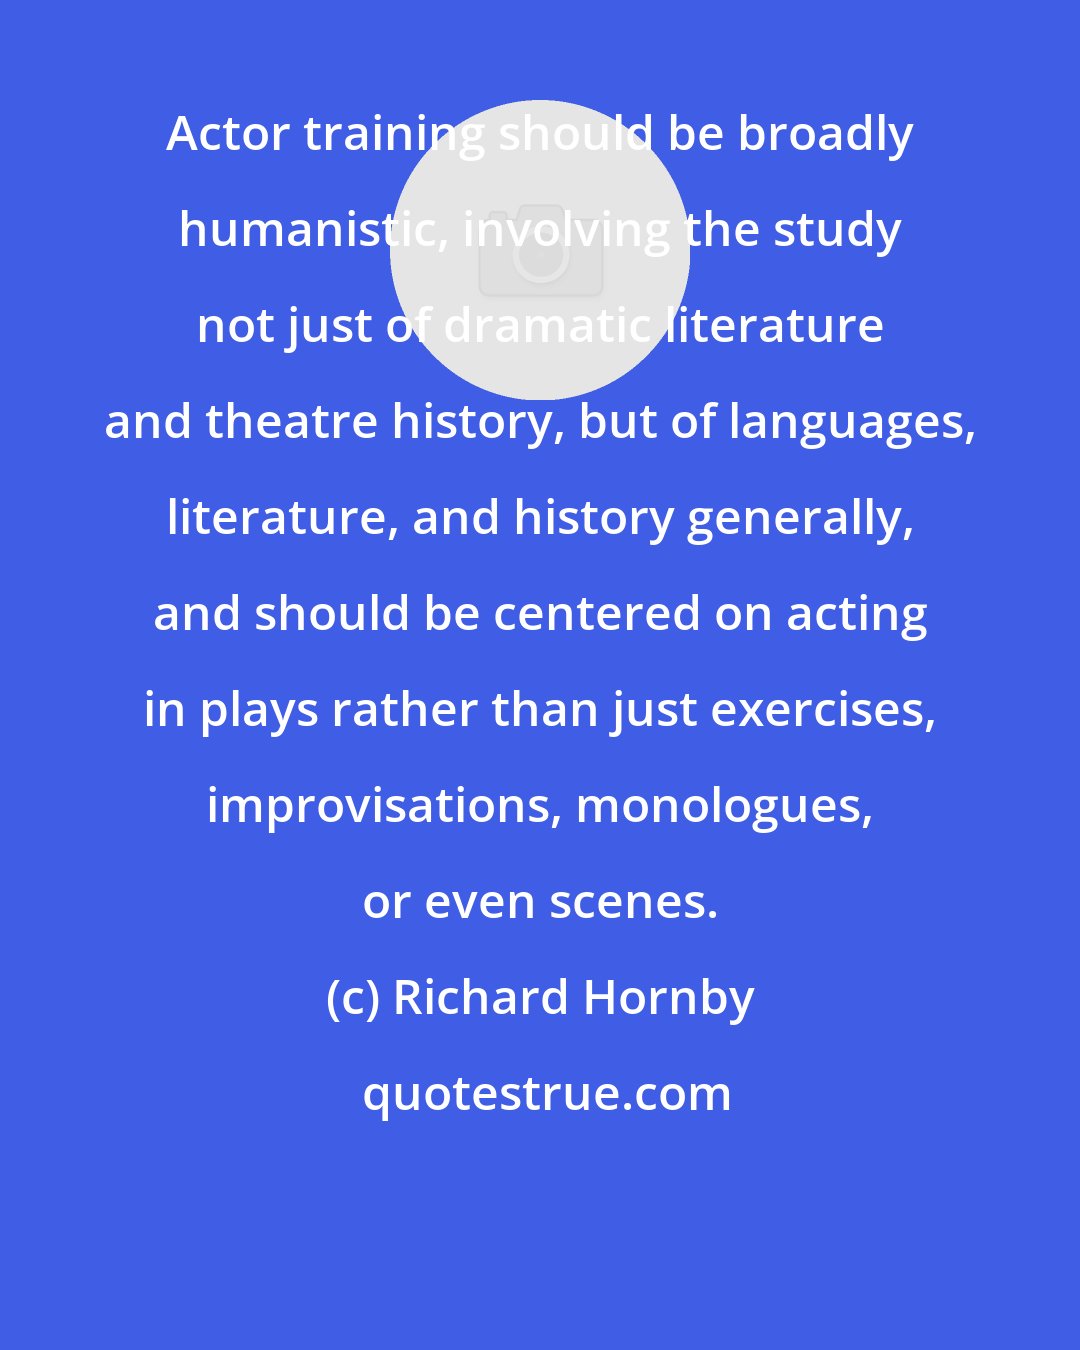 Richard Hornby: Actor training should be broadly humanistic, involving the study not just of dramatic literature and theatre history, but of languages, literature, and history generally, and should be centered on acting in plays rather than just exercises, improvisations, monologues, or even scenes.